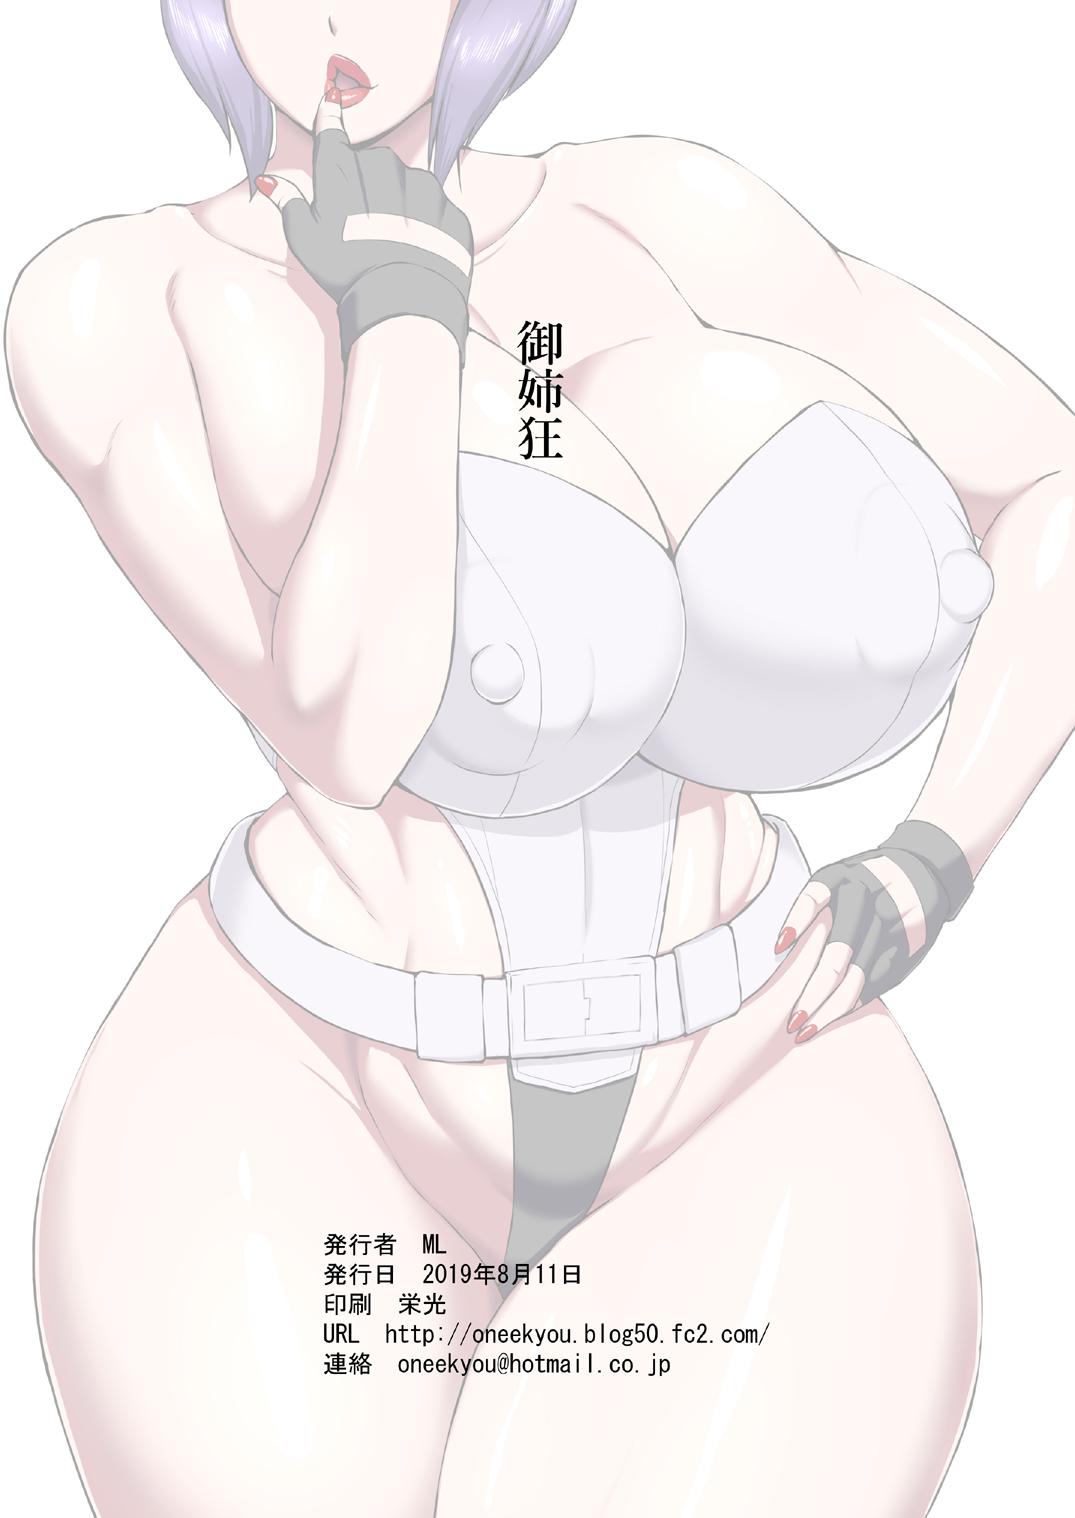 Baile Shotagui Mesu Gorilla - Ghost in the shell Petite Teenager - Page 2